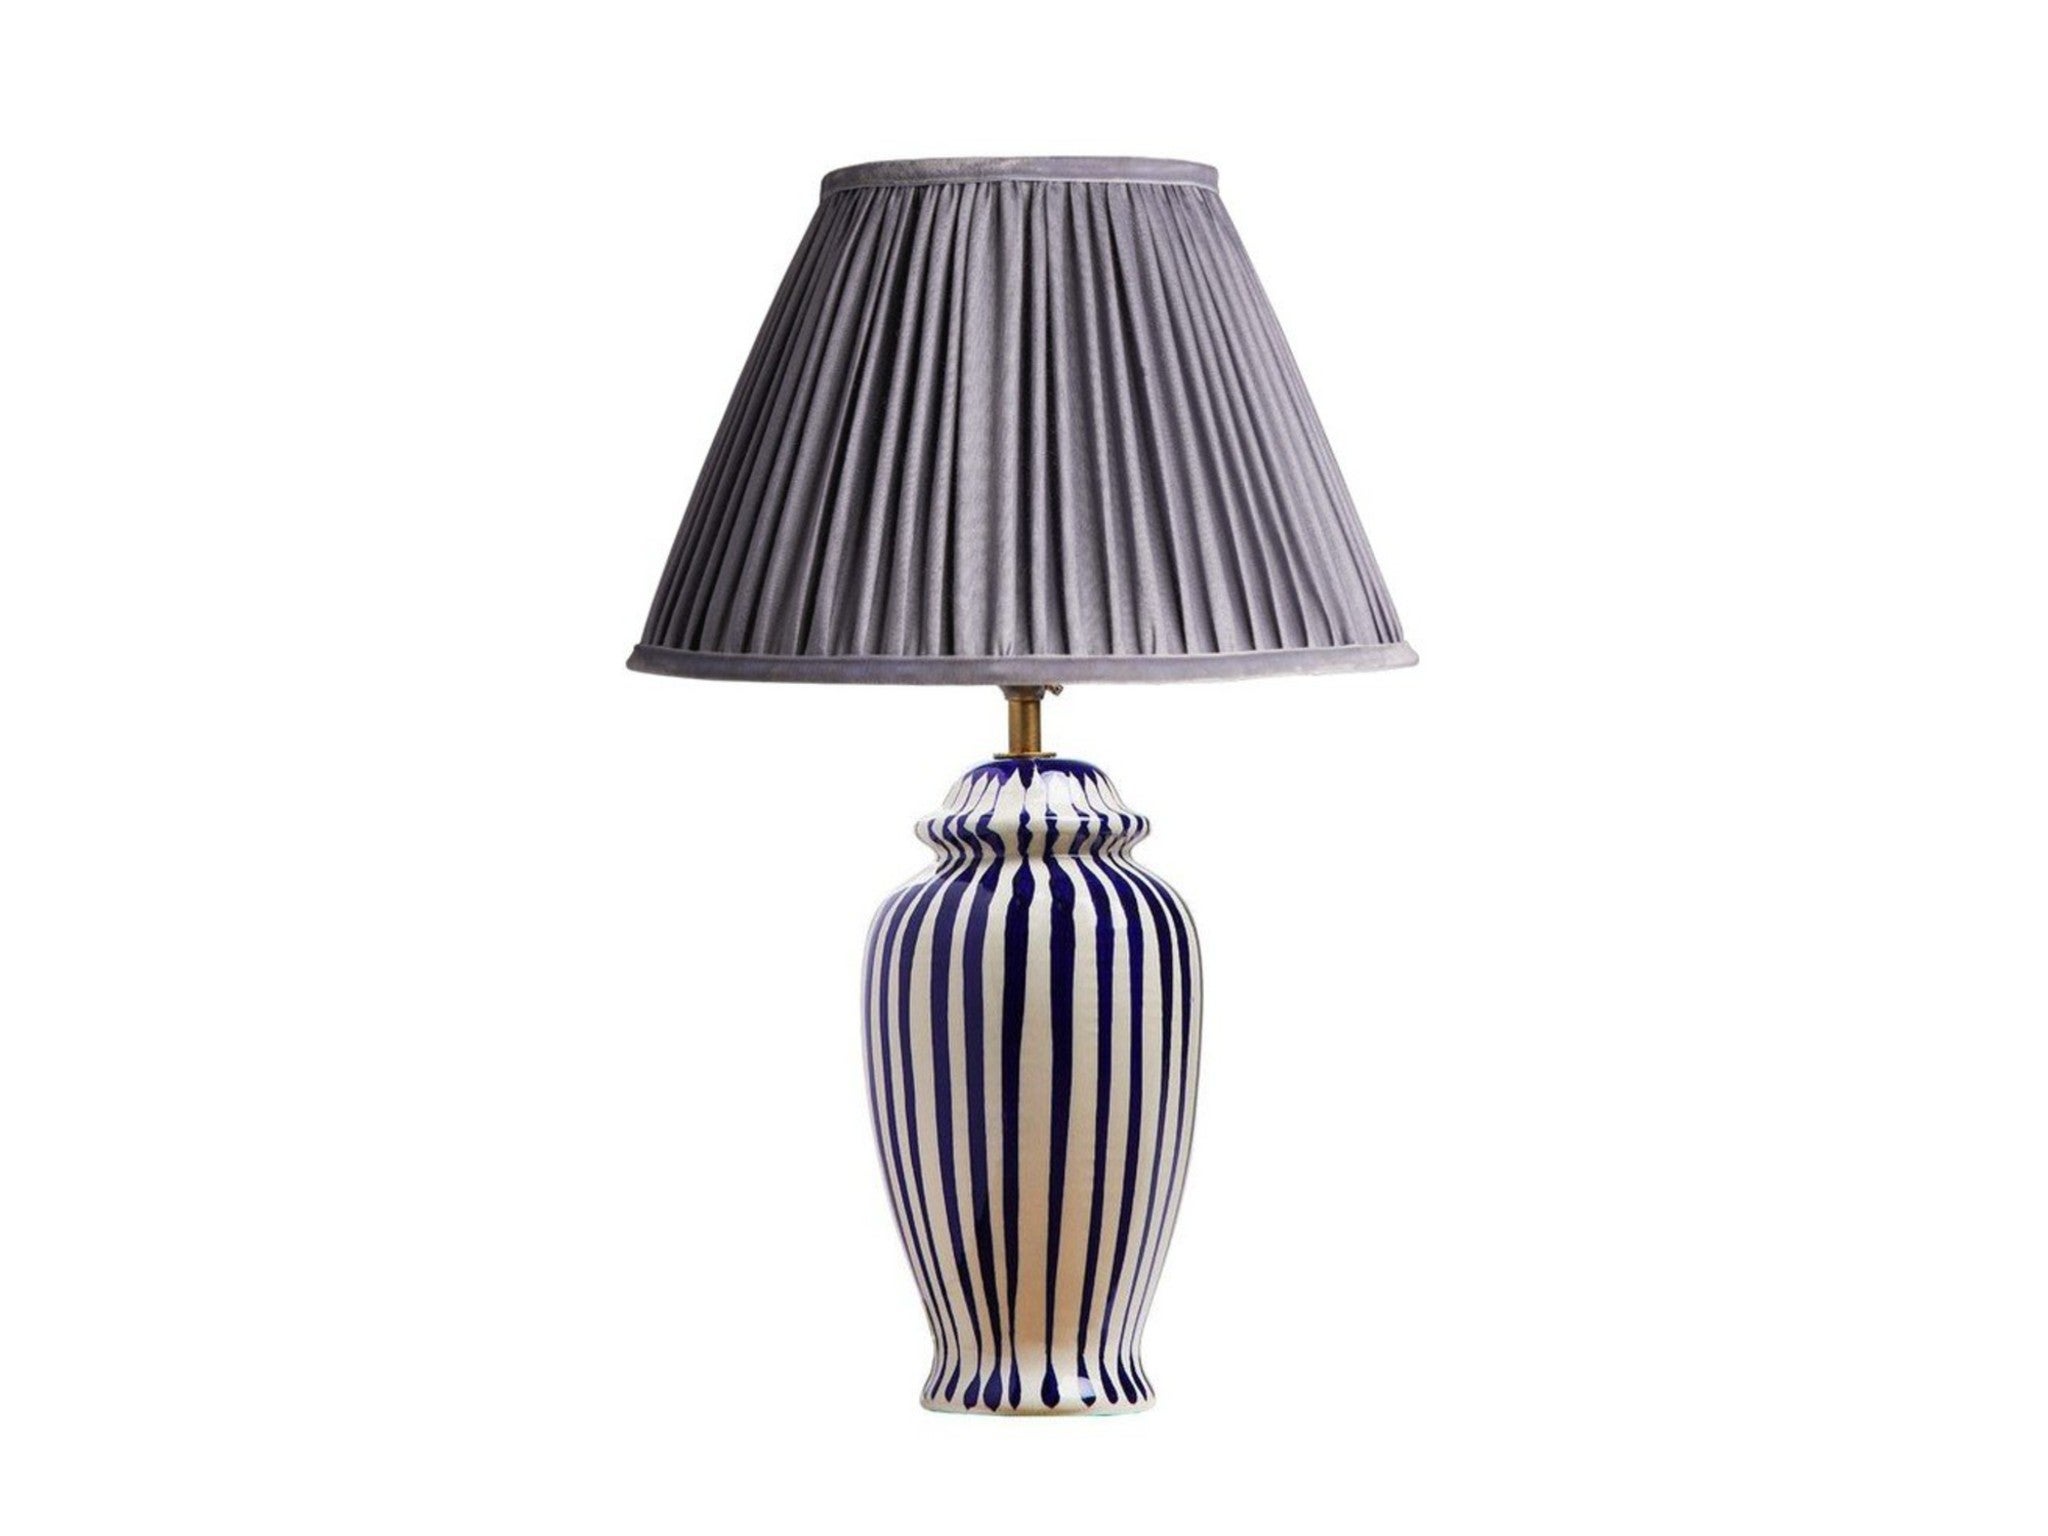 Best bedside lamps: touch lamps contemporary and classic designs | The Independent